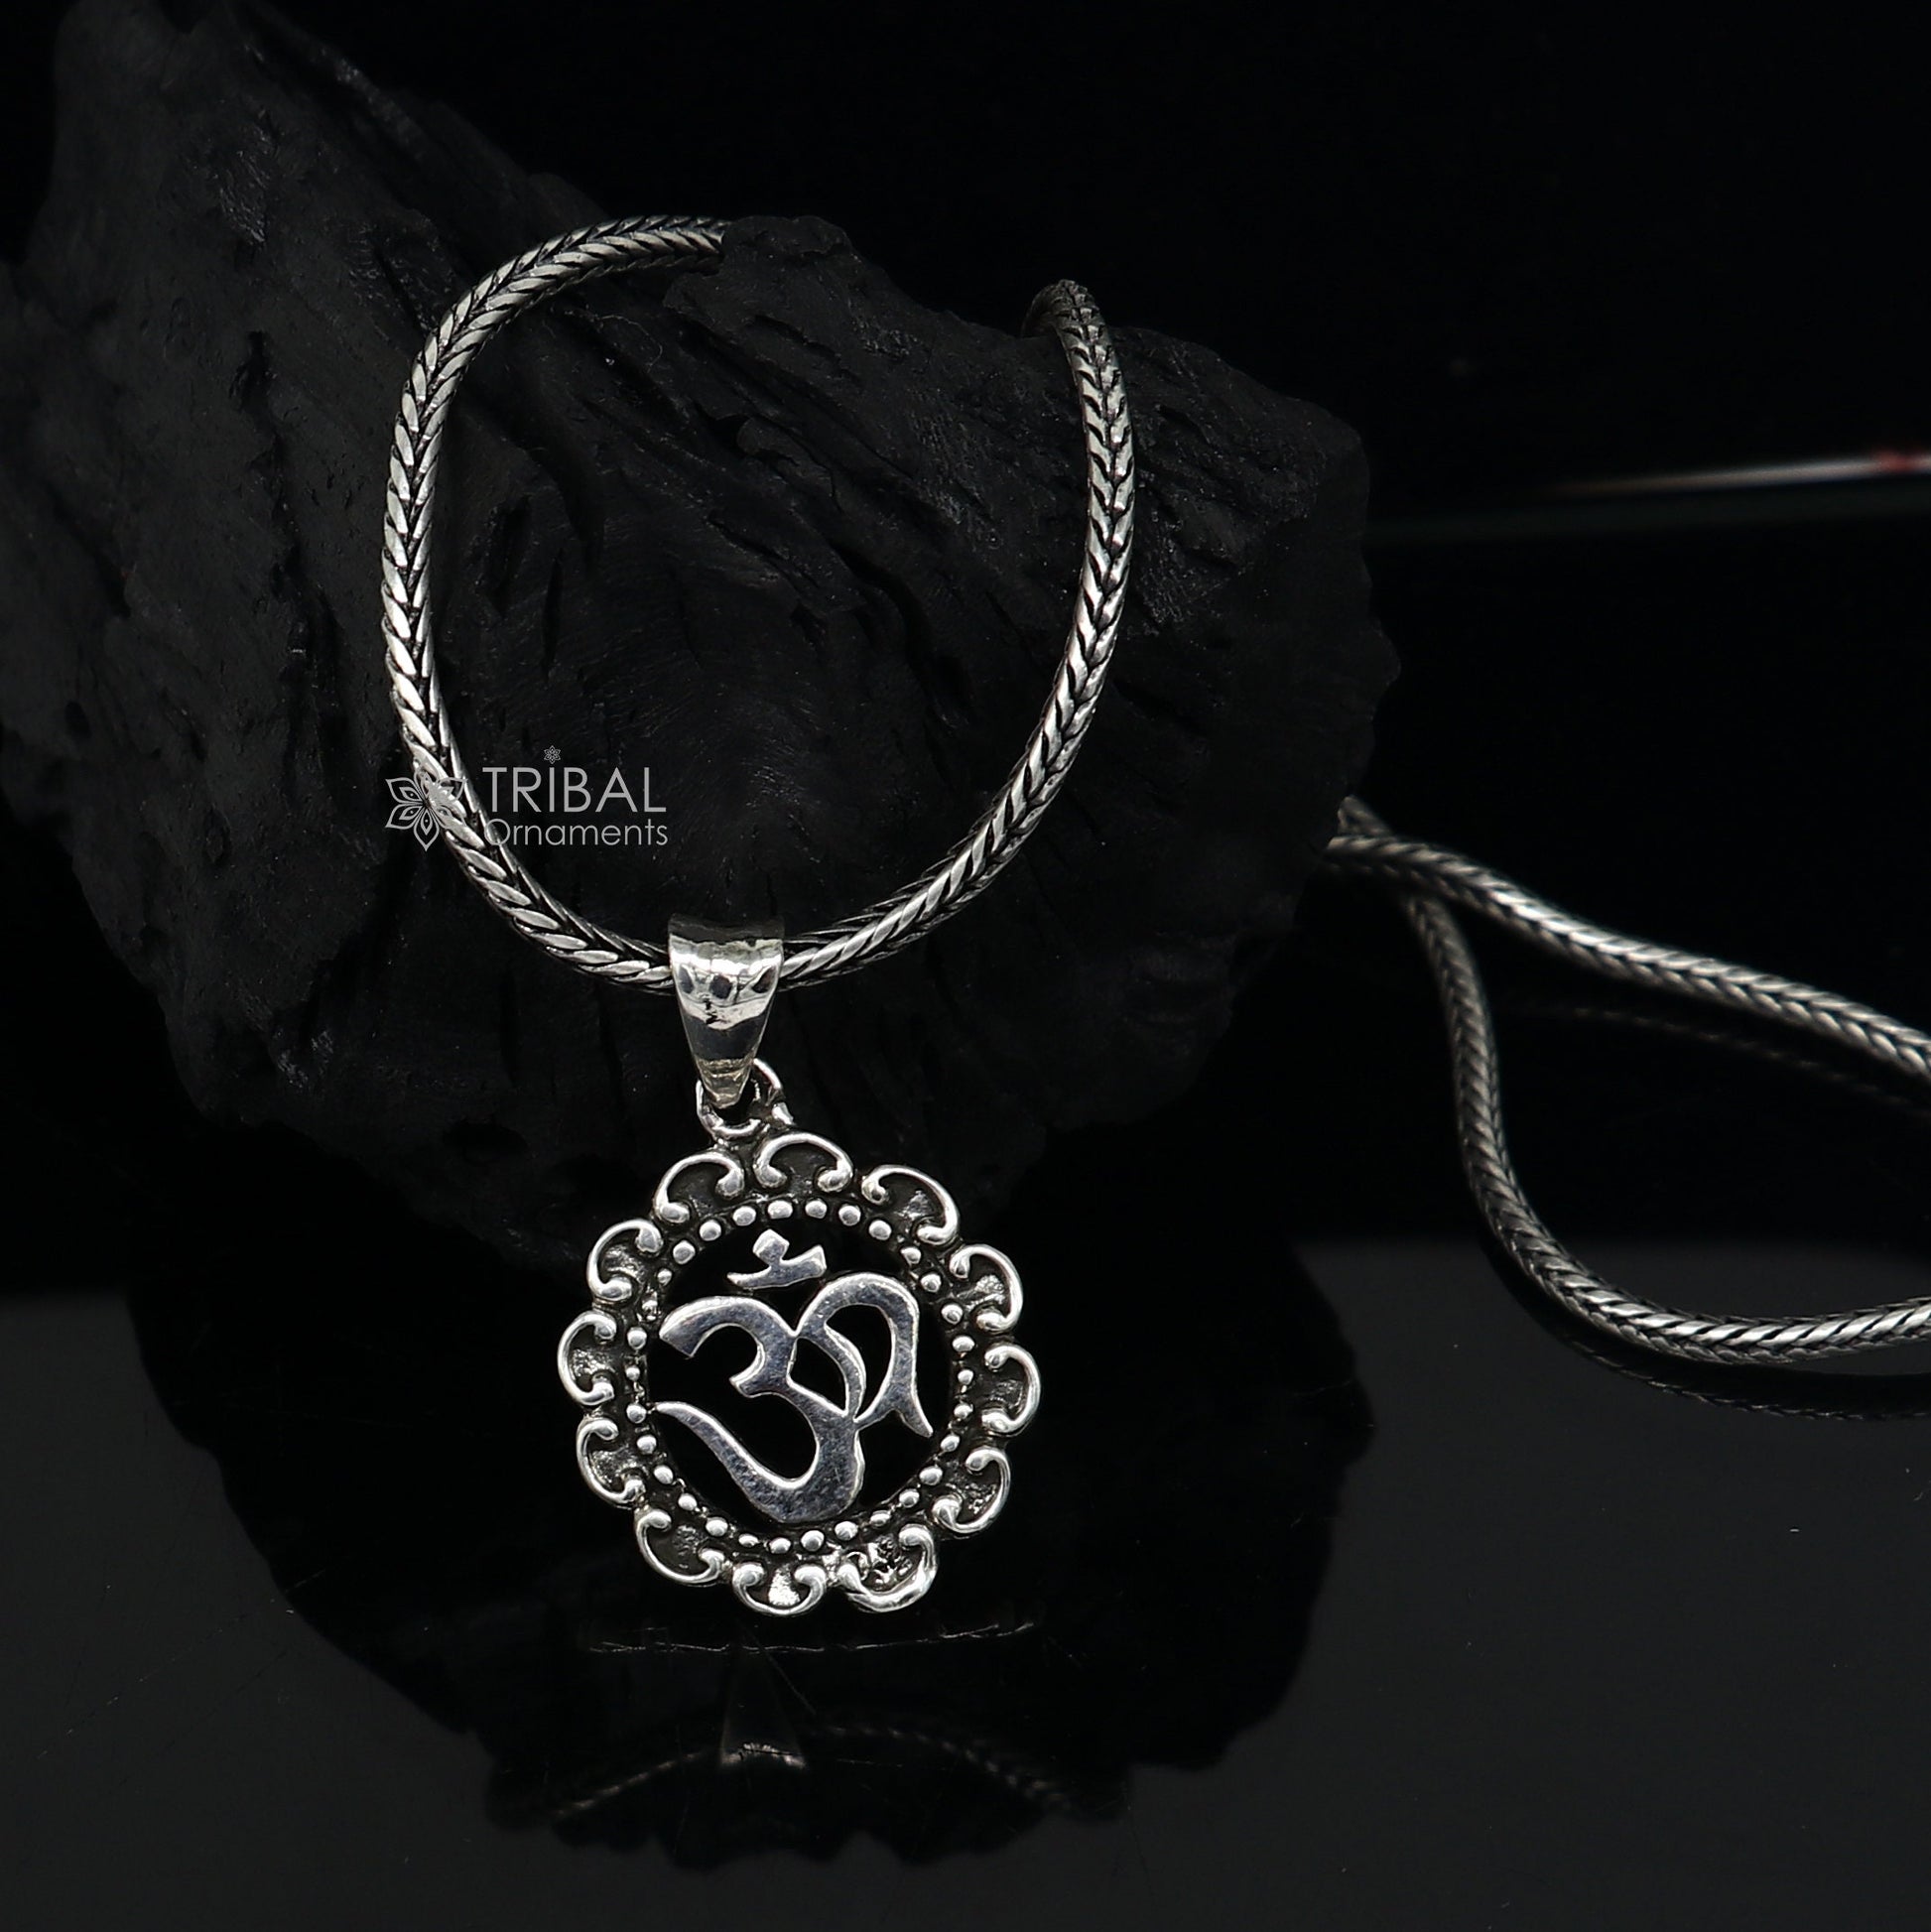 925 pure silver divine mantra AUM OR OM pendant best gifting pendant, wheat chain necklace locket best delicate unisex  jewelry nsp740 - TRIBAL ORNAMENTS